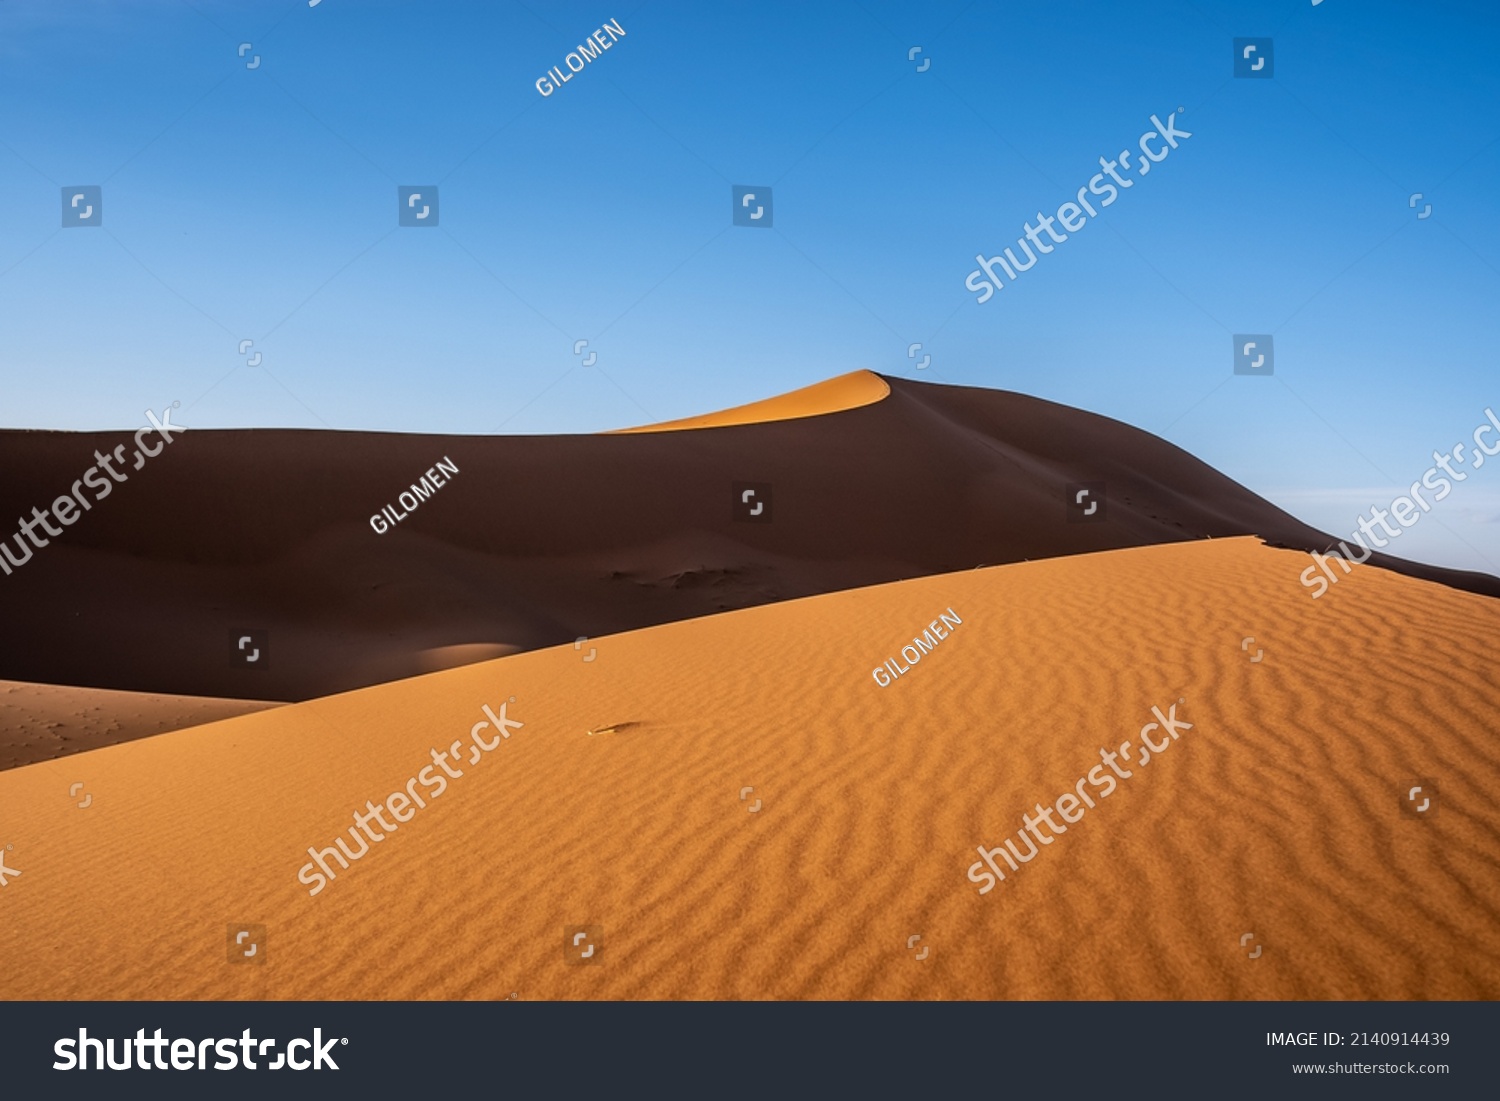 The blue sky and the desert seem to blend together #2140914439